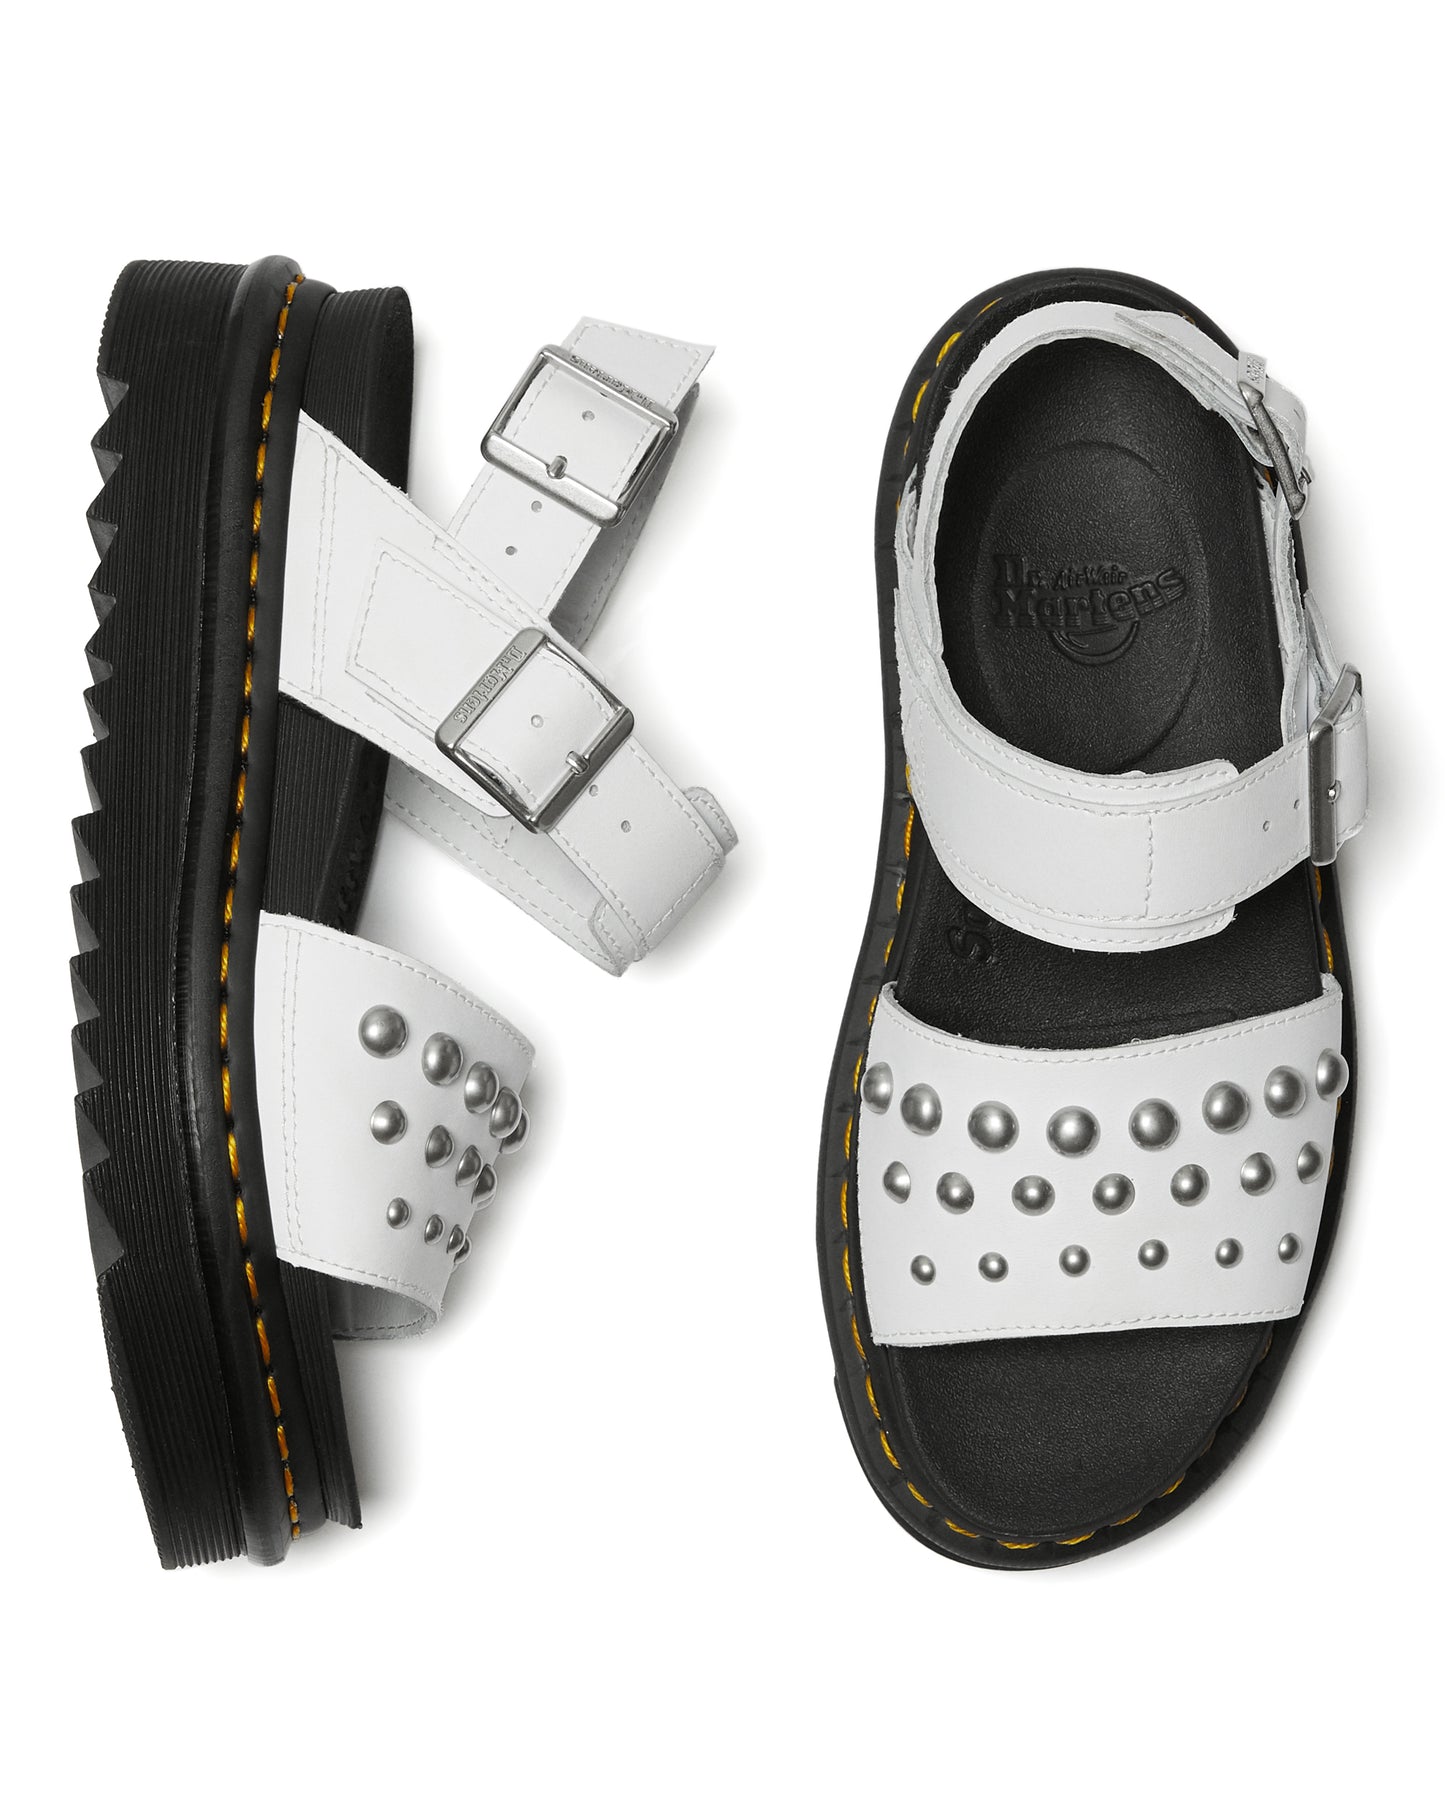 VOSS LEATHER STUDDED SANDALS